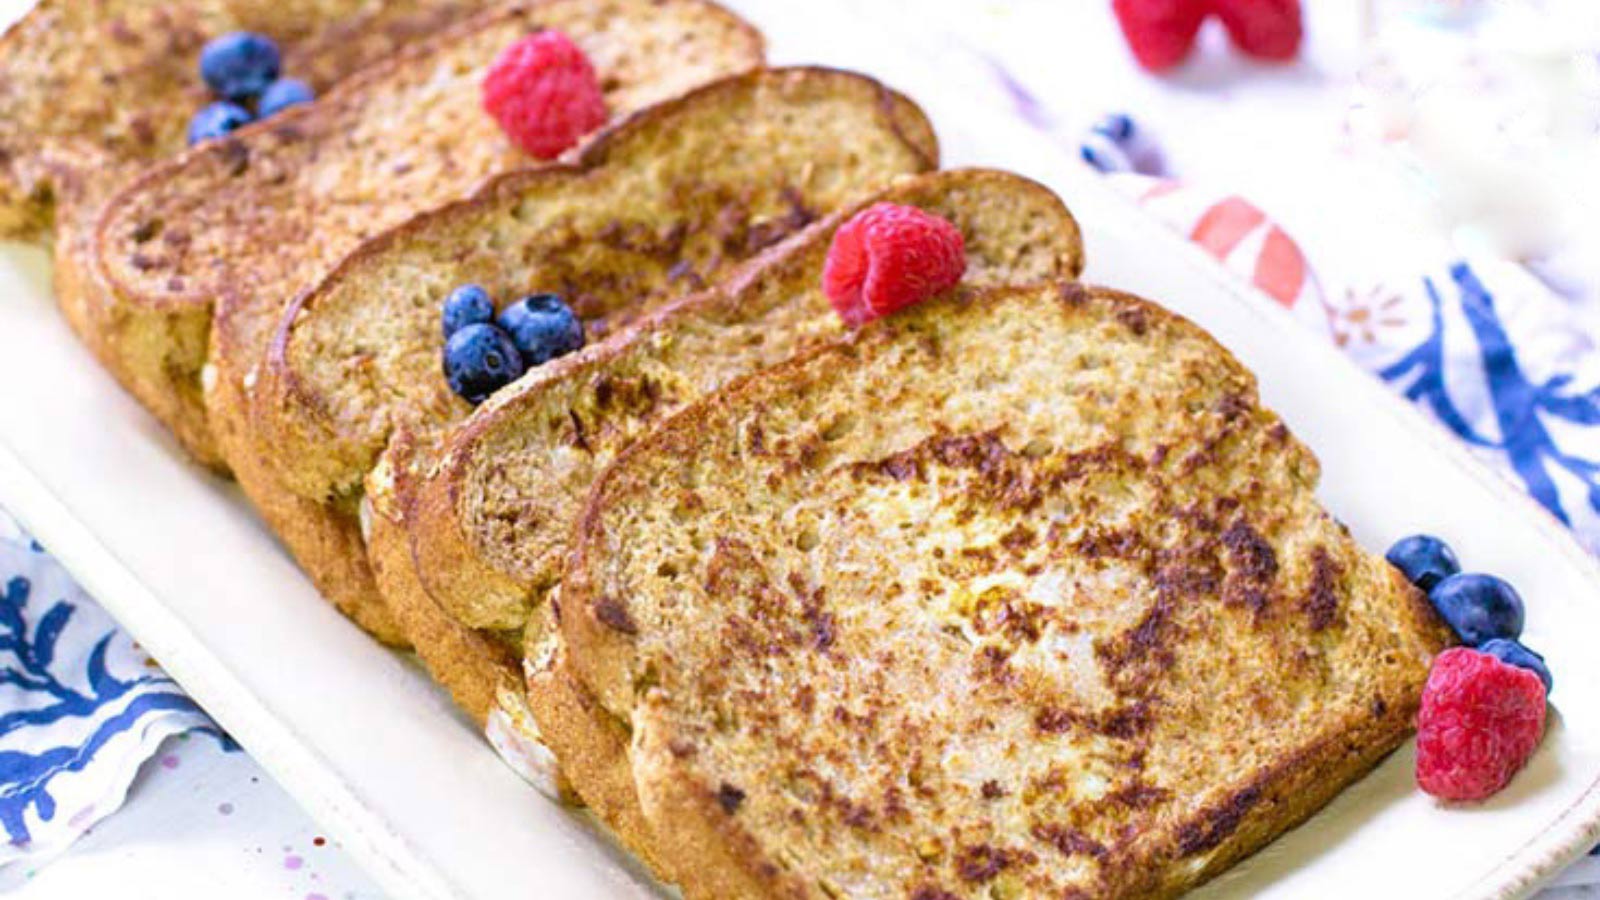 French toast slices lined up on a white platter, sprinkled with a few fresh blueberries and raspberries.